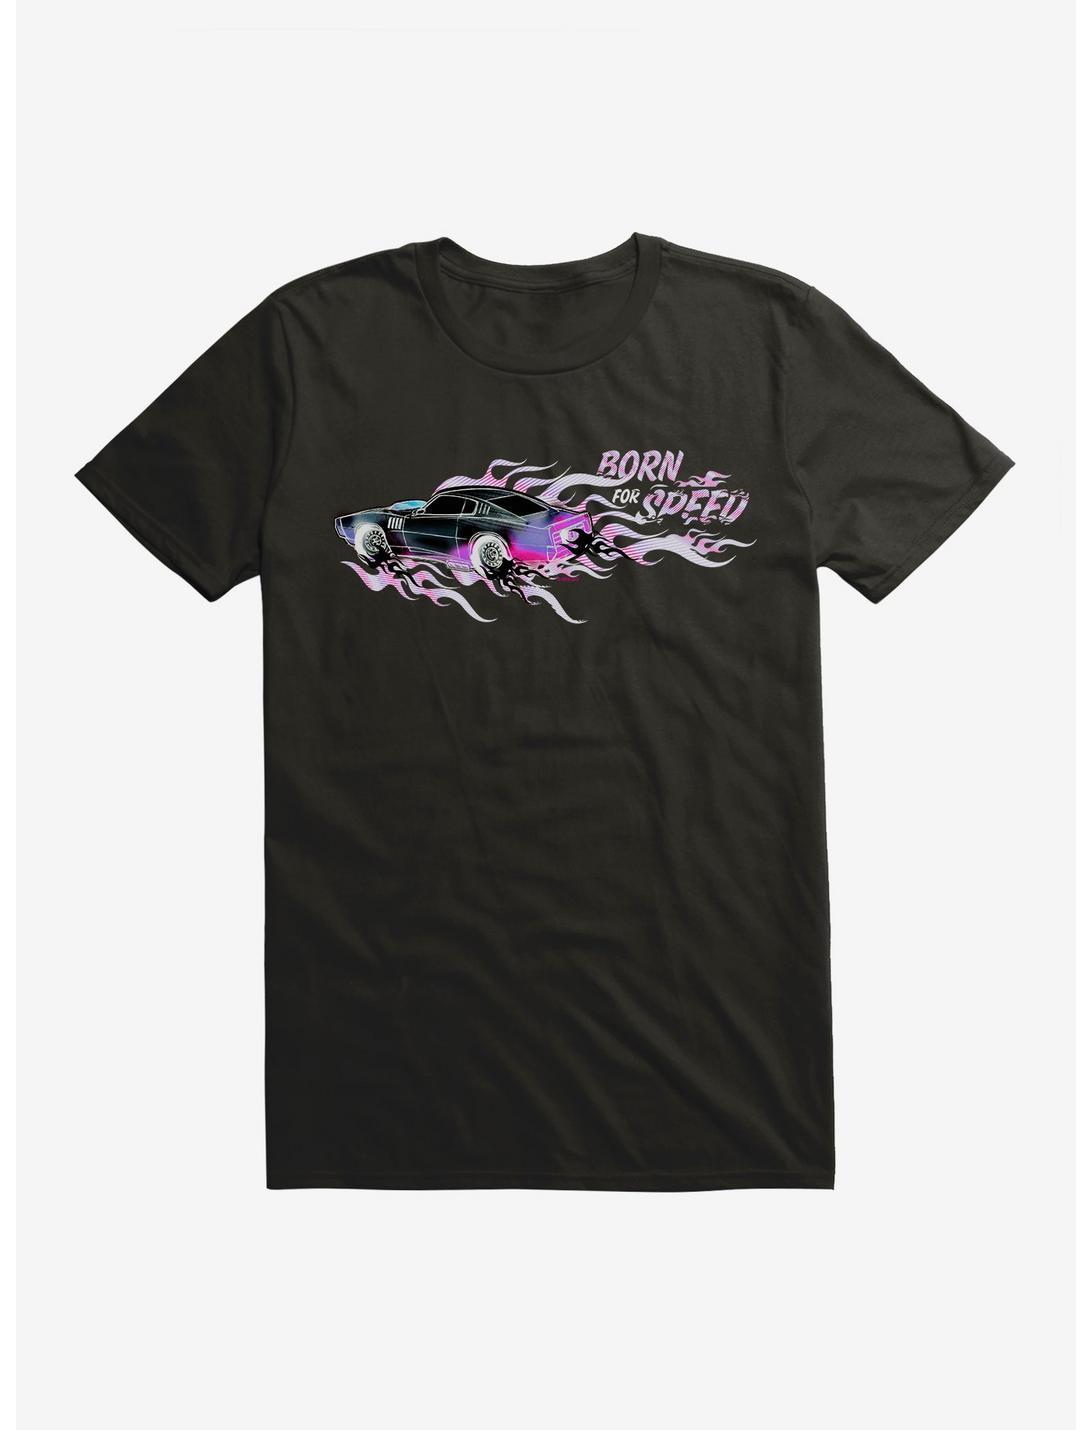 Fast & Furious Born For Speed Flames T-Shirt, BLACK, hi-res